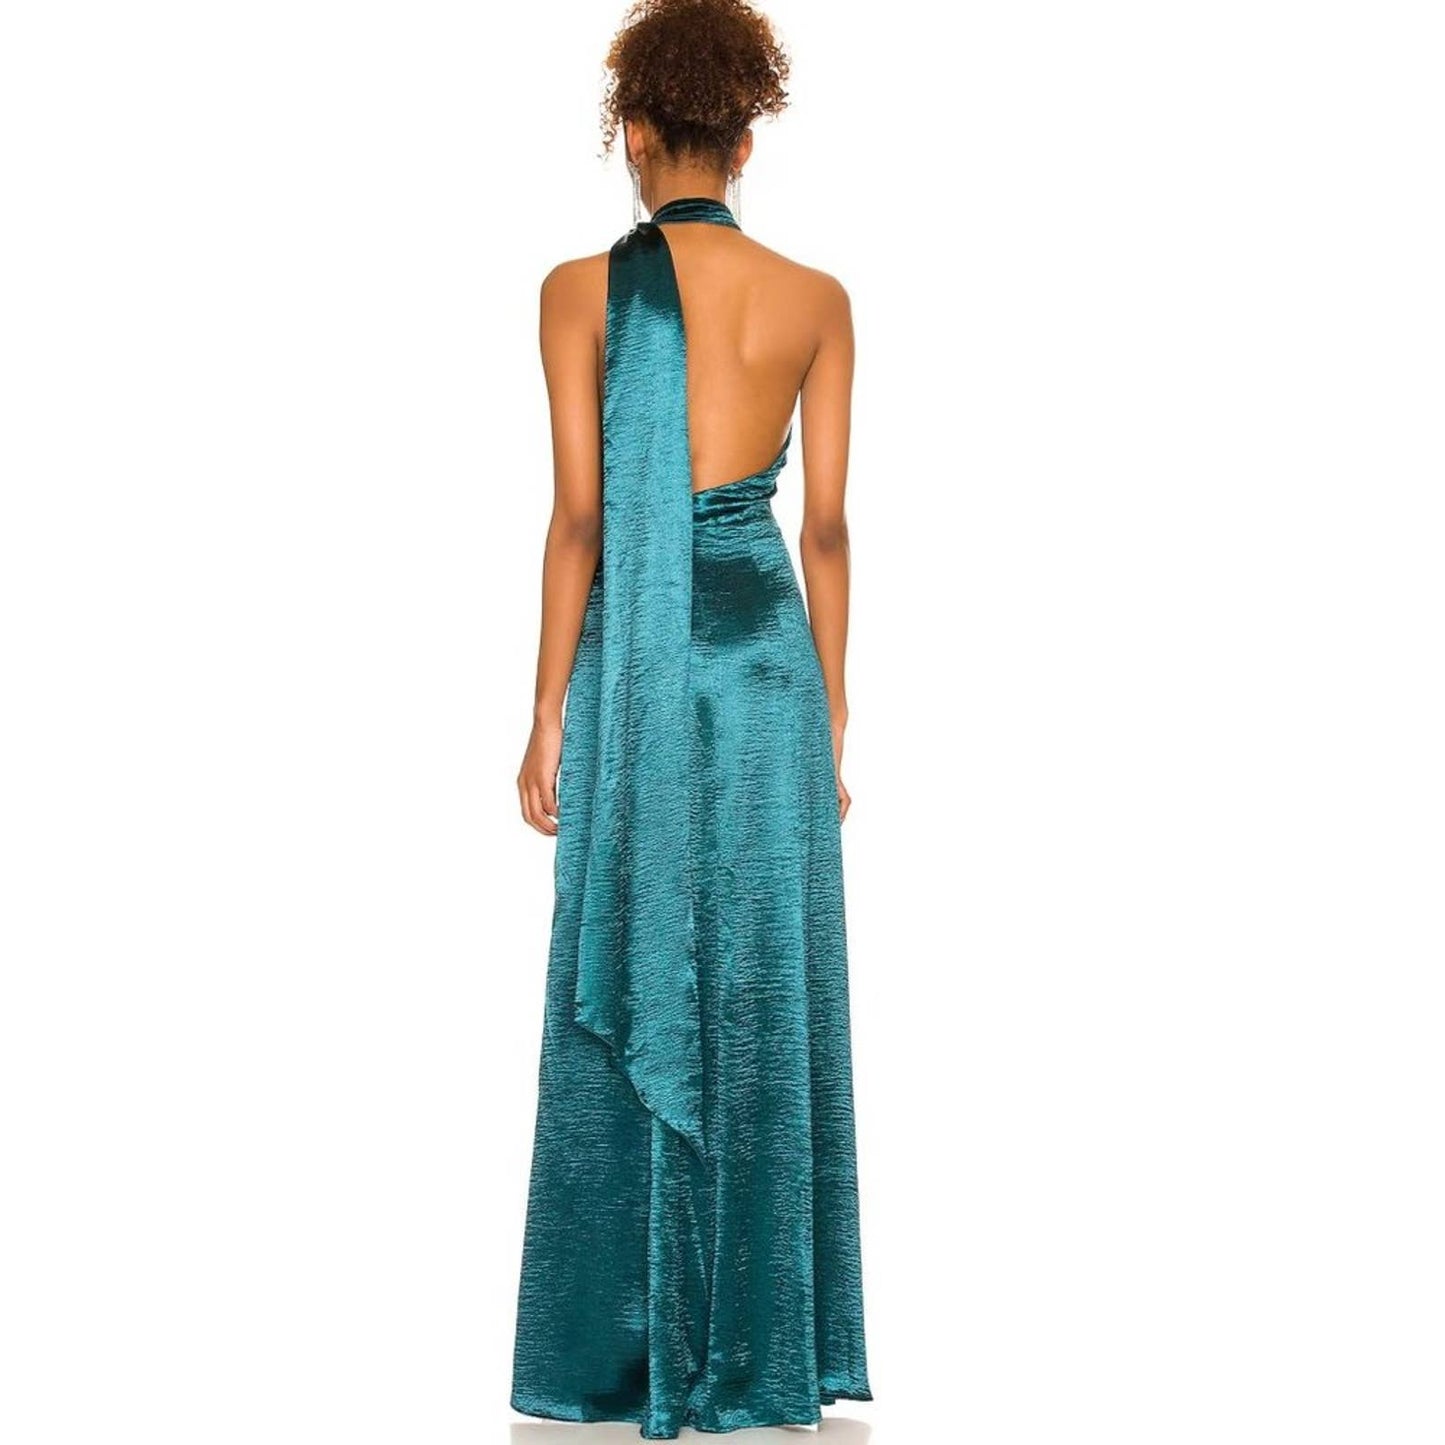 Lovers and Friends Kendall Gown in Dark Jade Green NWOT Size Small